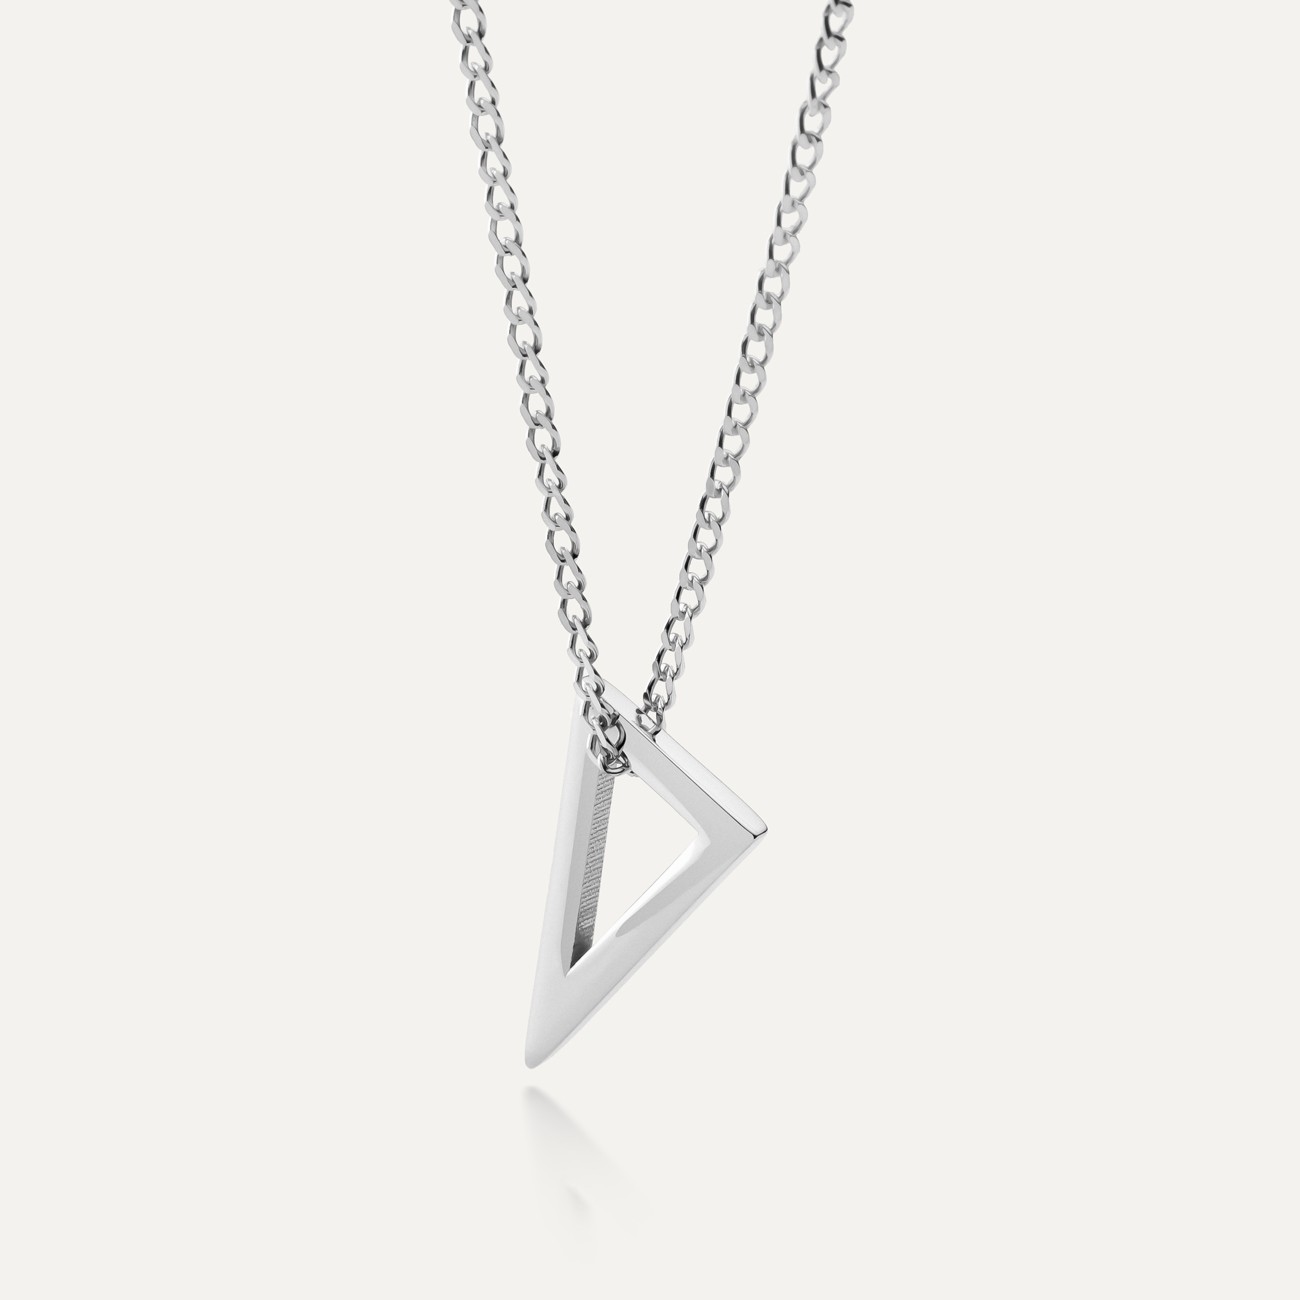 Geometric necklace triangle pendant, sterling silver 925